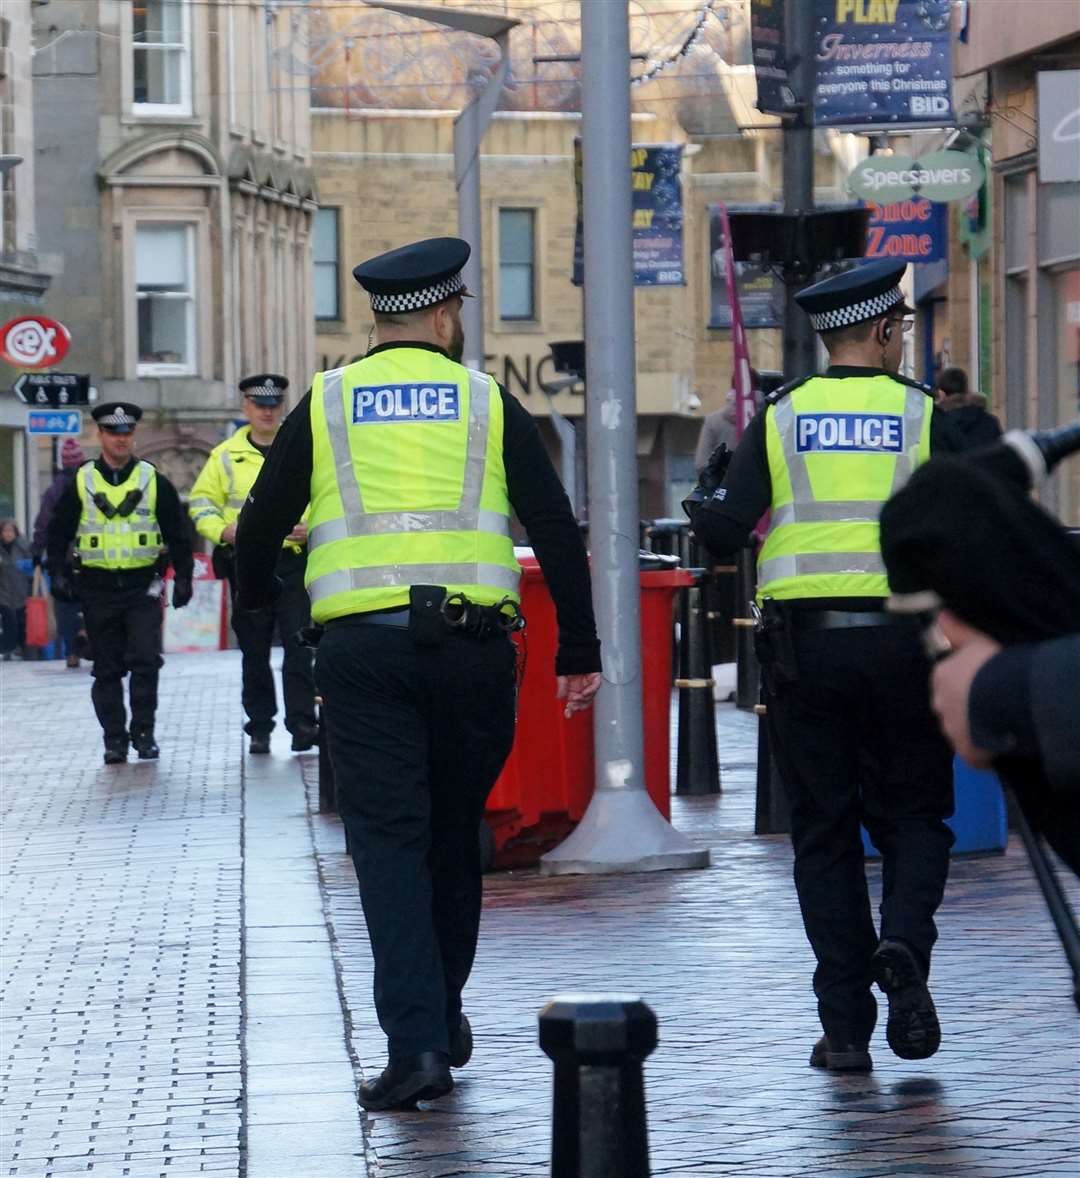 Police on the beat on Inverness High Street - but are they always there when you need them?